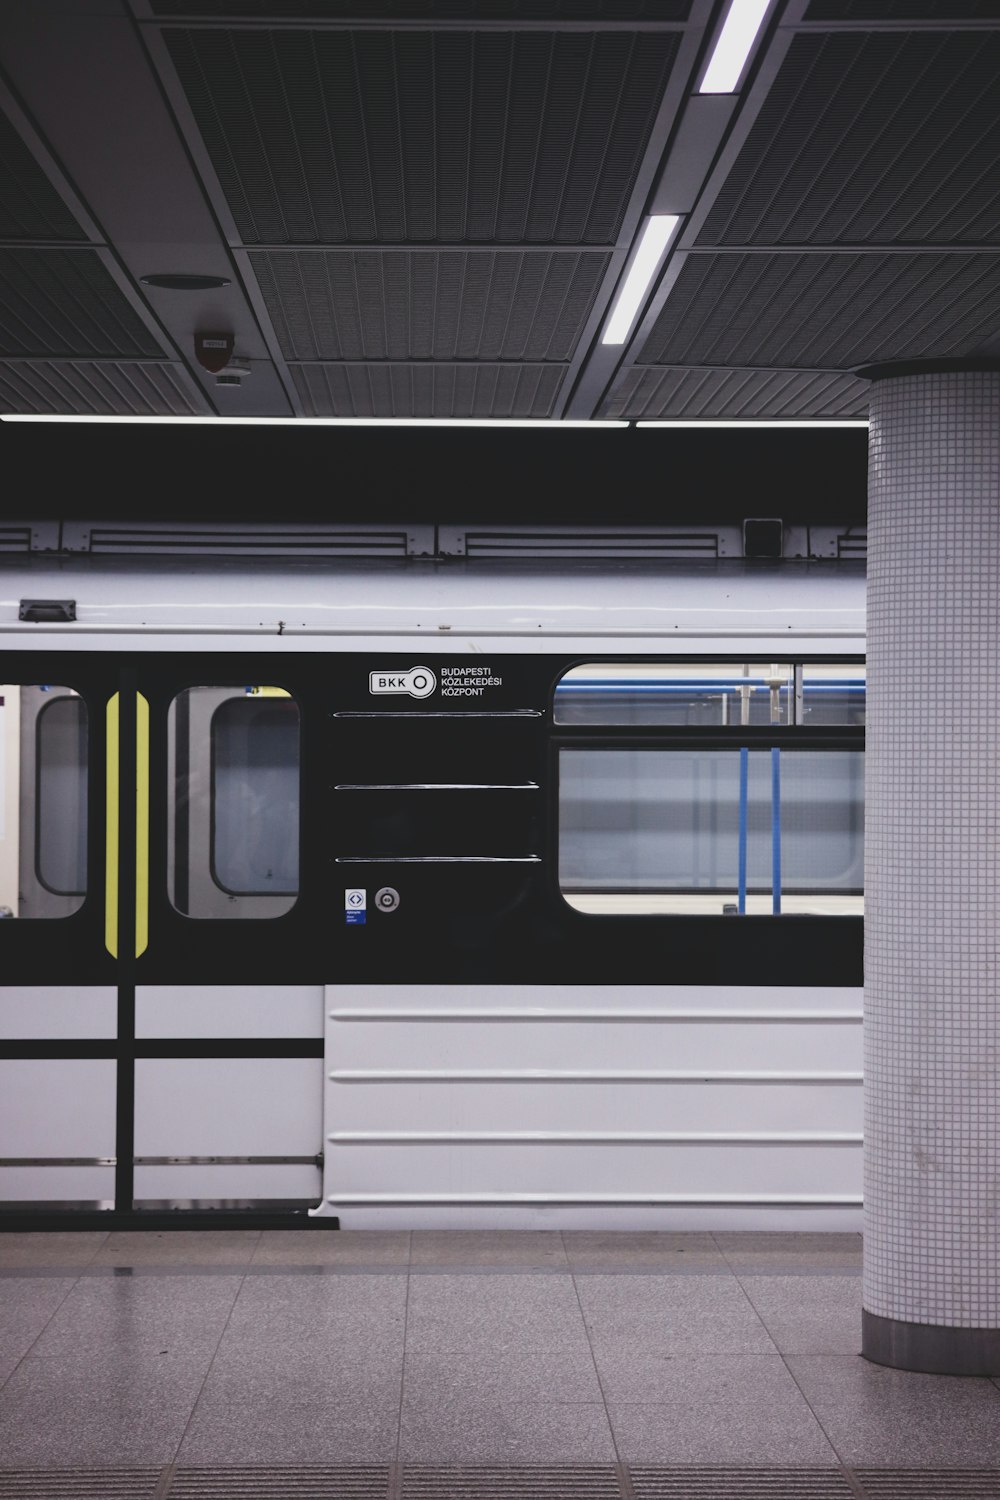 a subway train parked at a train station